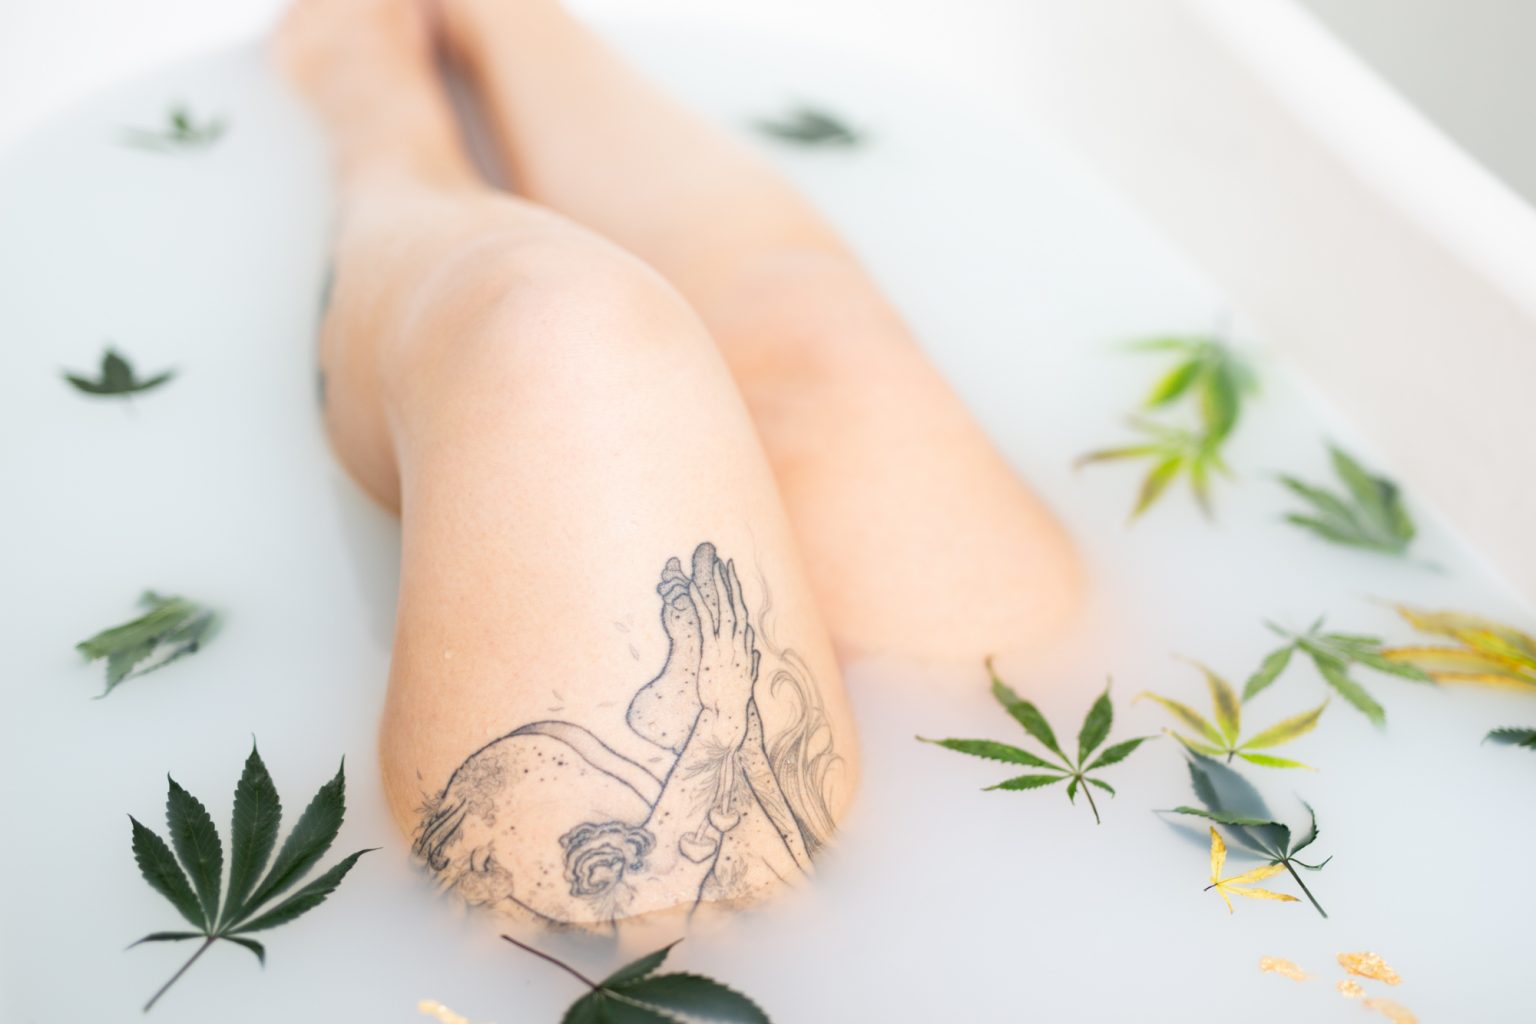 https://lilacandfernphotography.com/wp-content/uploads/2022/03/Boudoir-Fort-Collins-Colorado-Lilac-and-Fern-AS-Tub-59-1536x1024.jpg